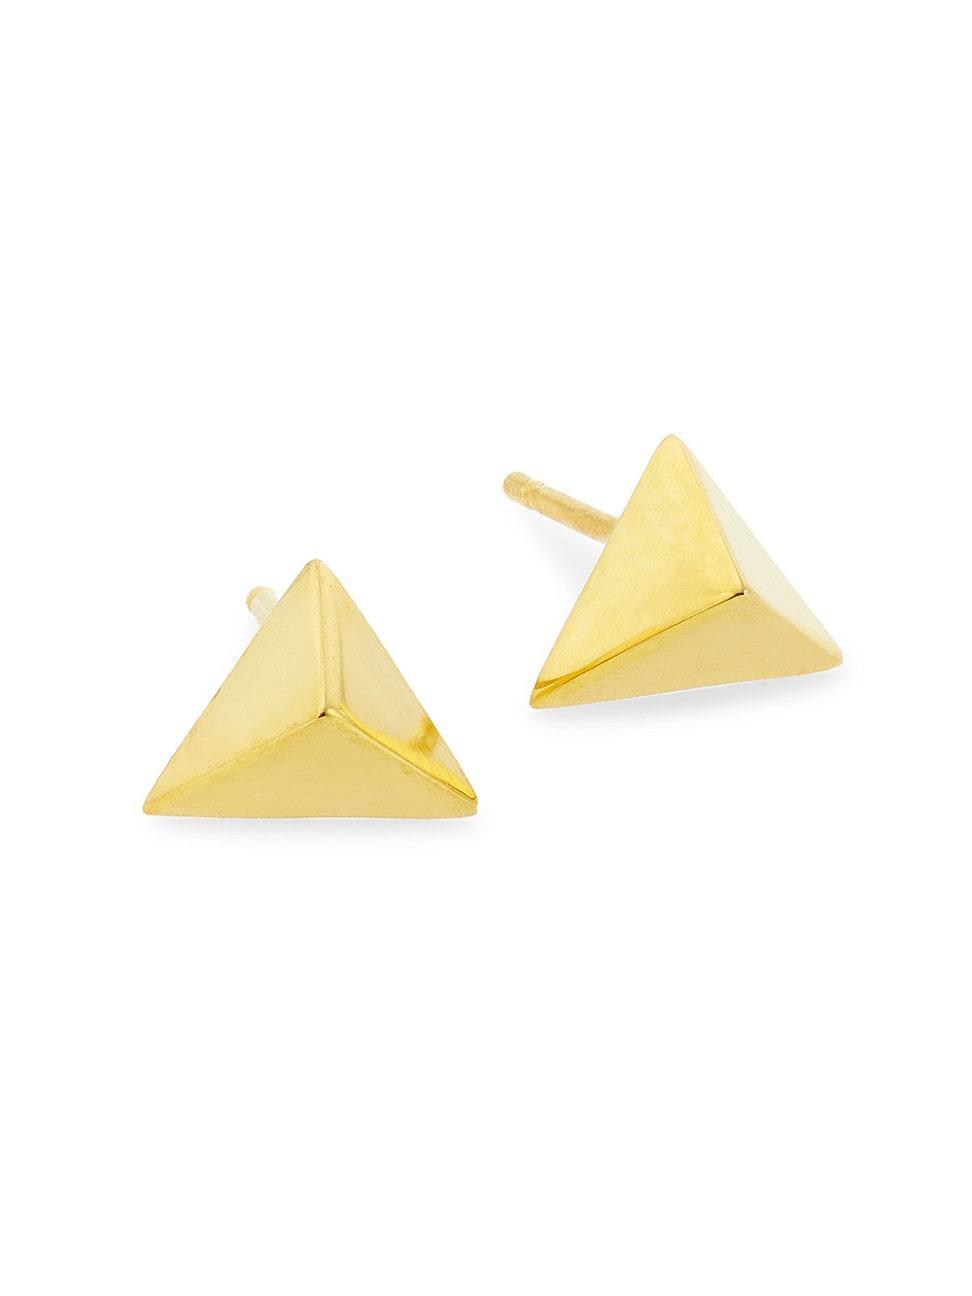 Womens Trilogy 14K-Gold-Plated Pyramid Stud Earrings Product Image